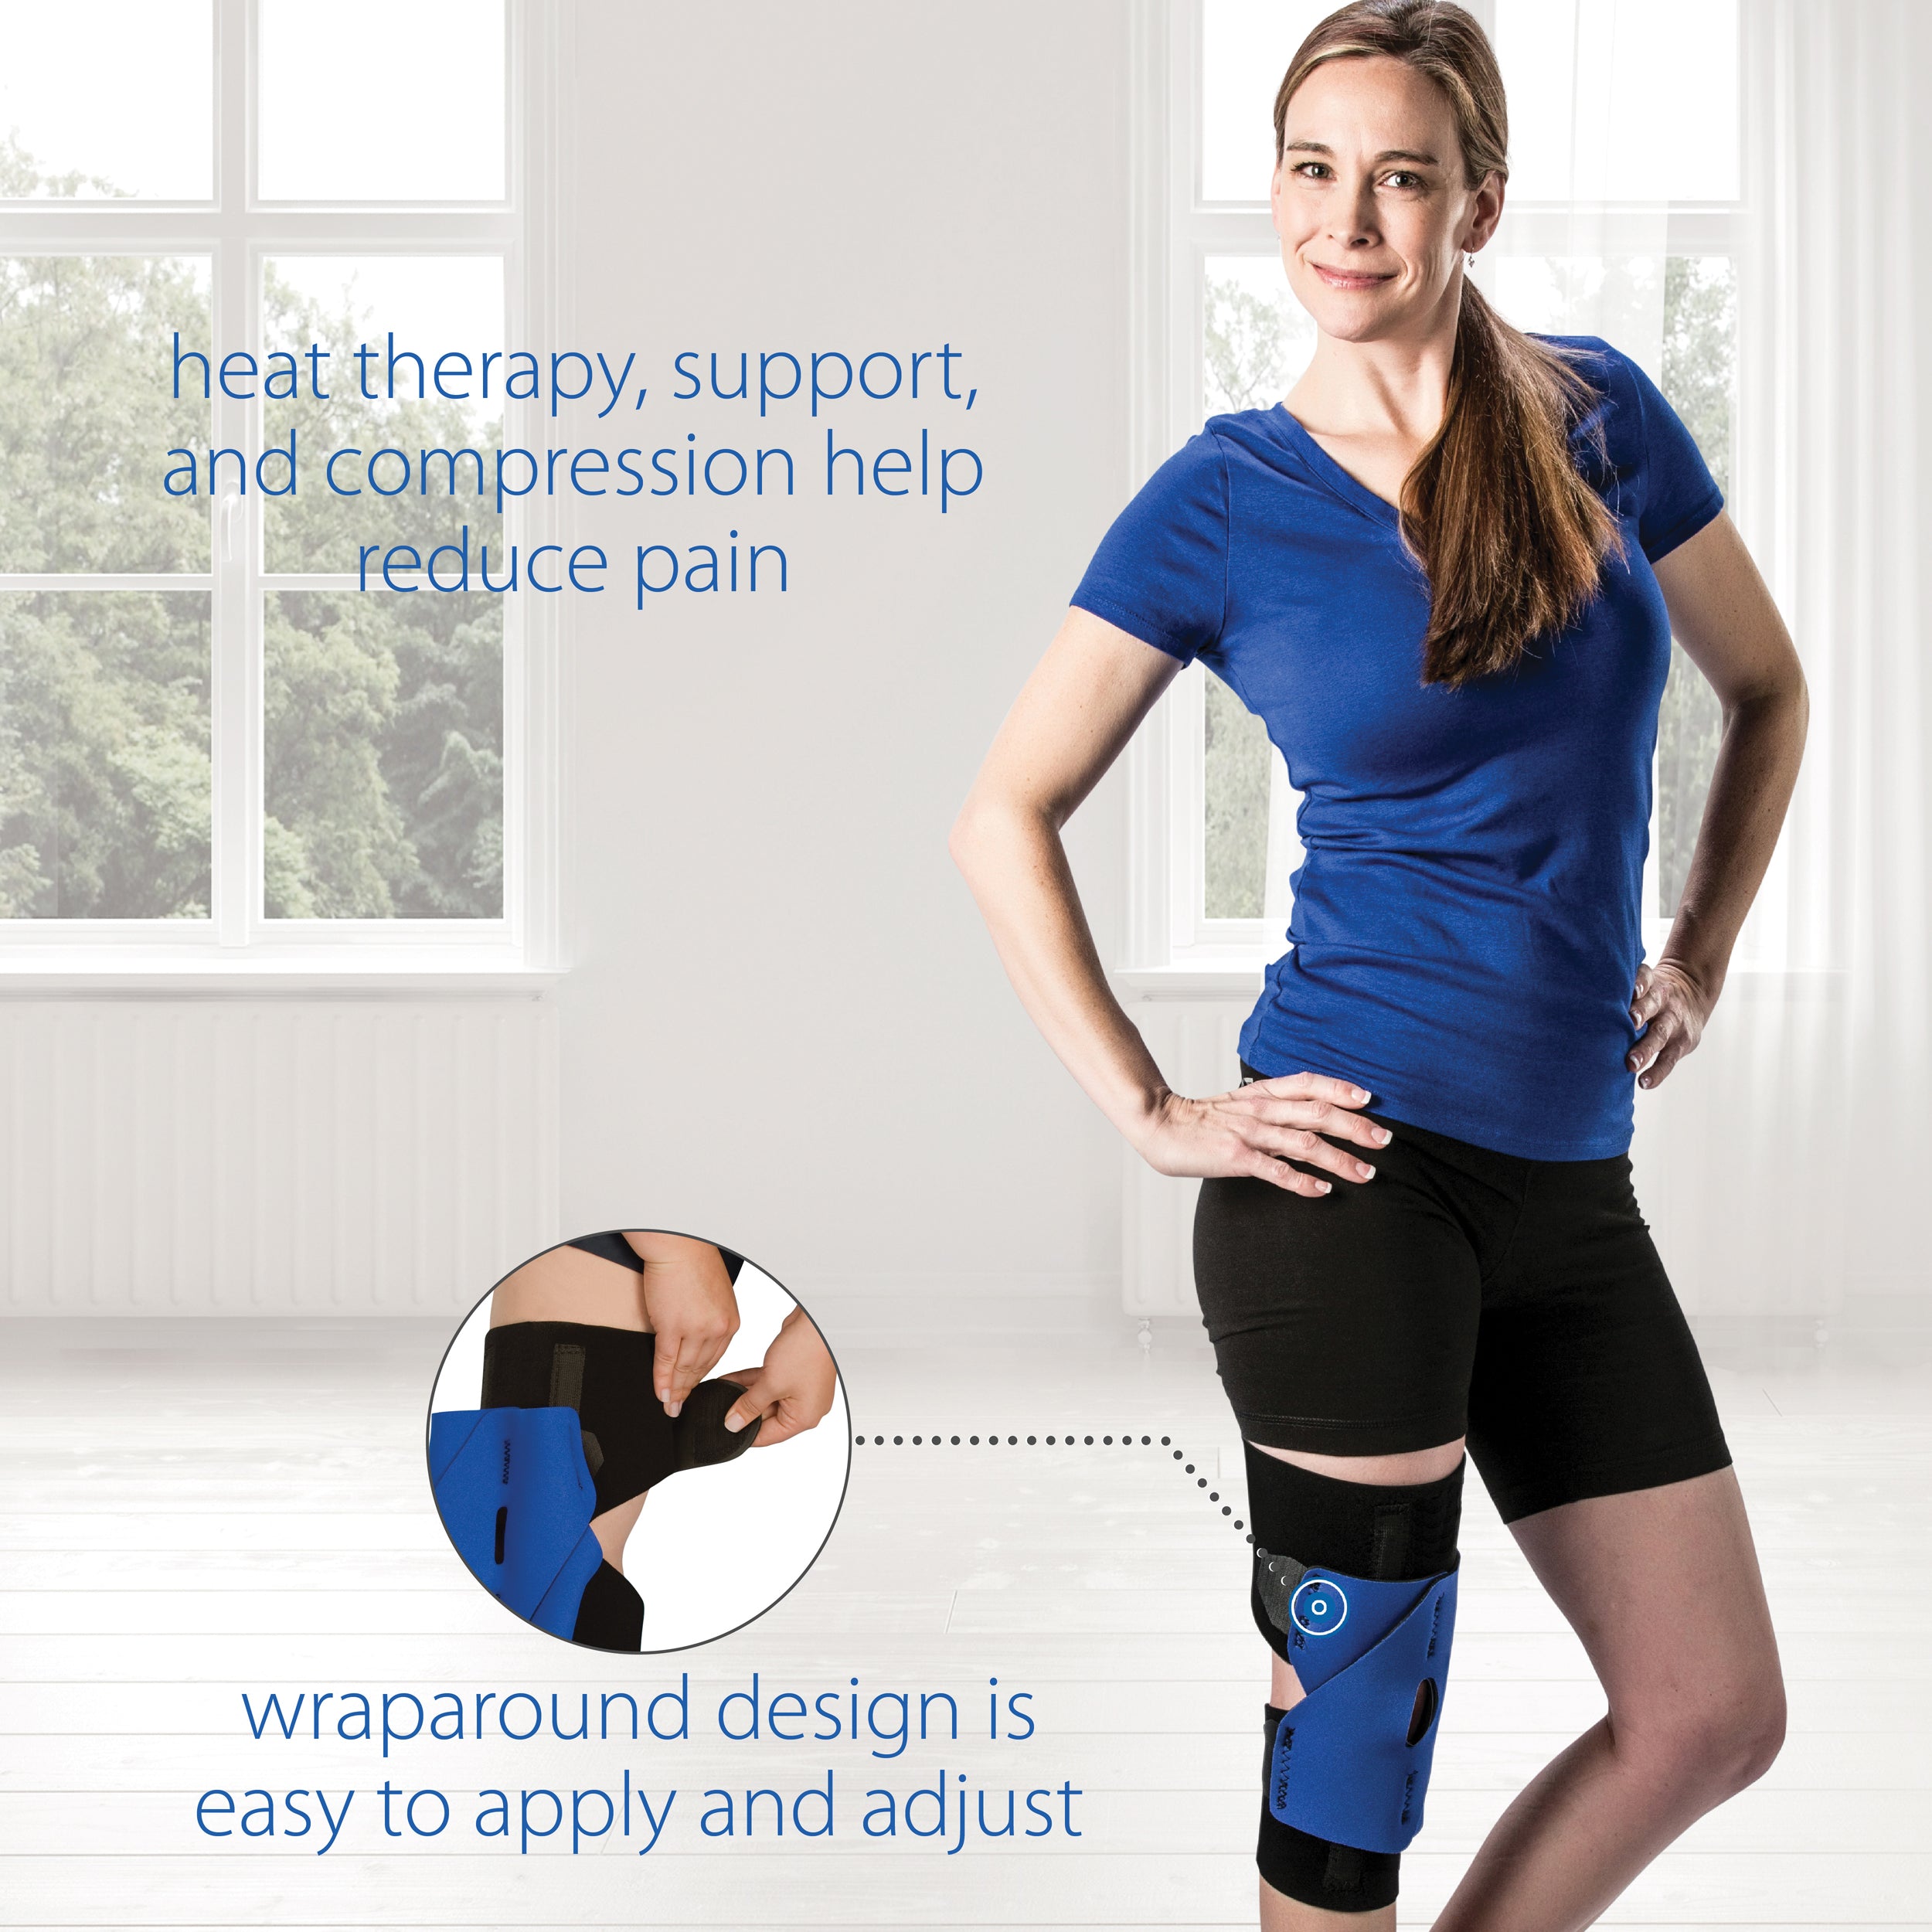 Performance Wrap Knee Support